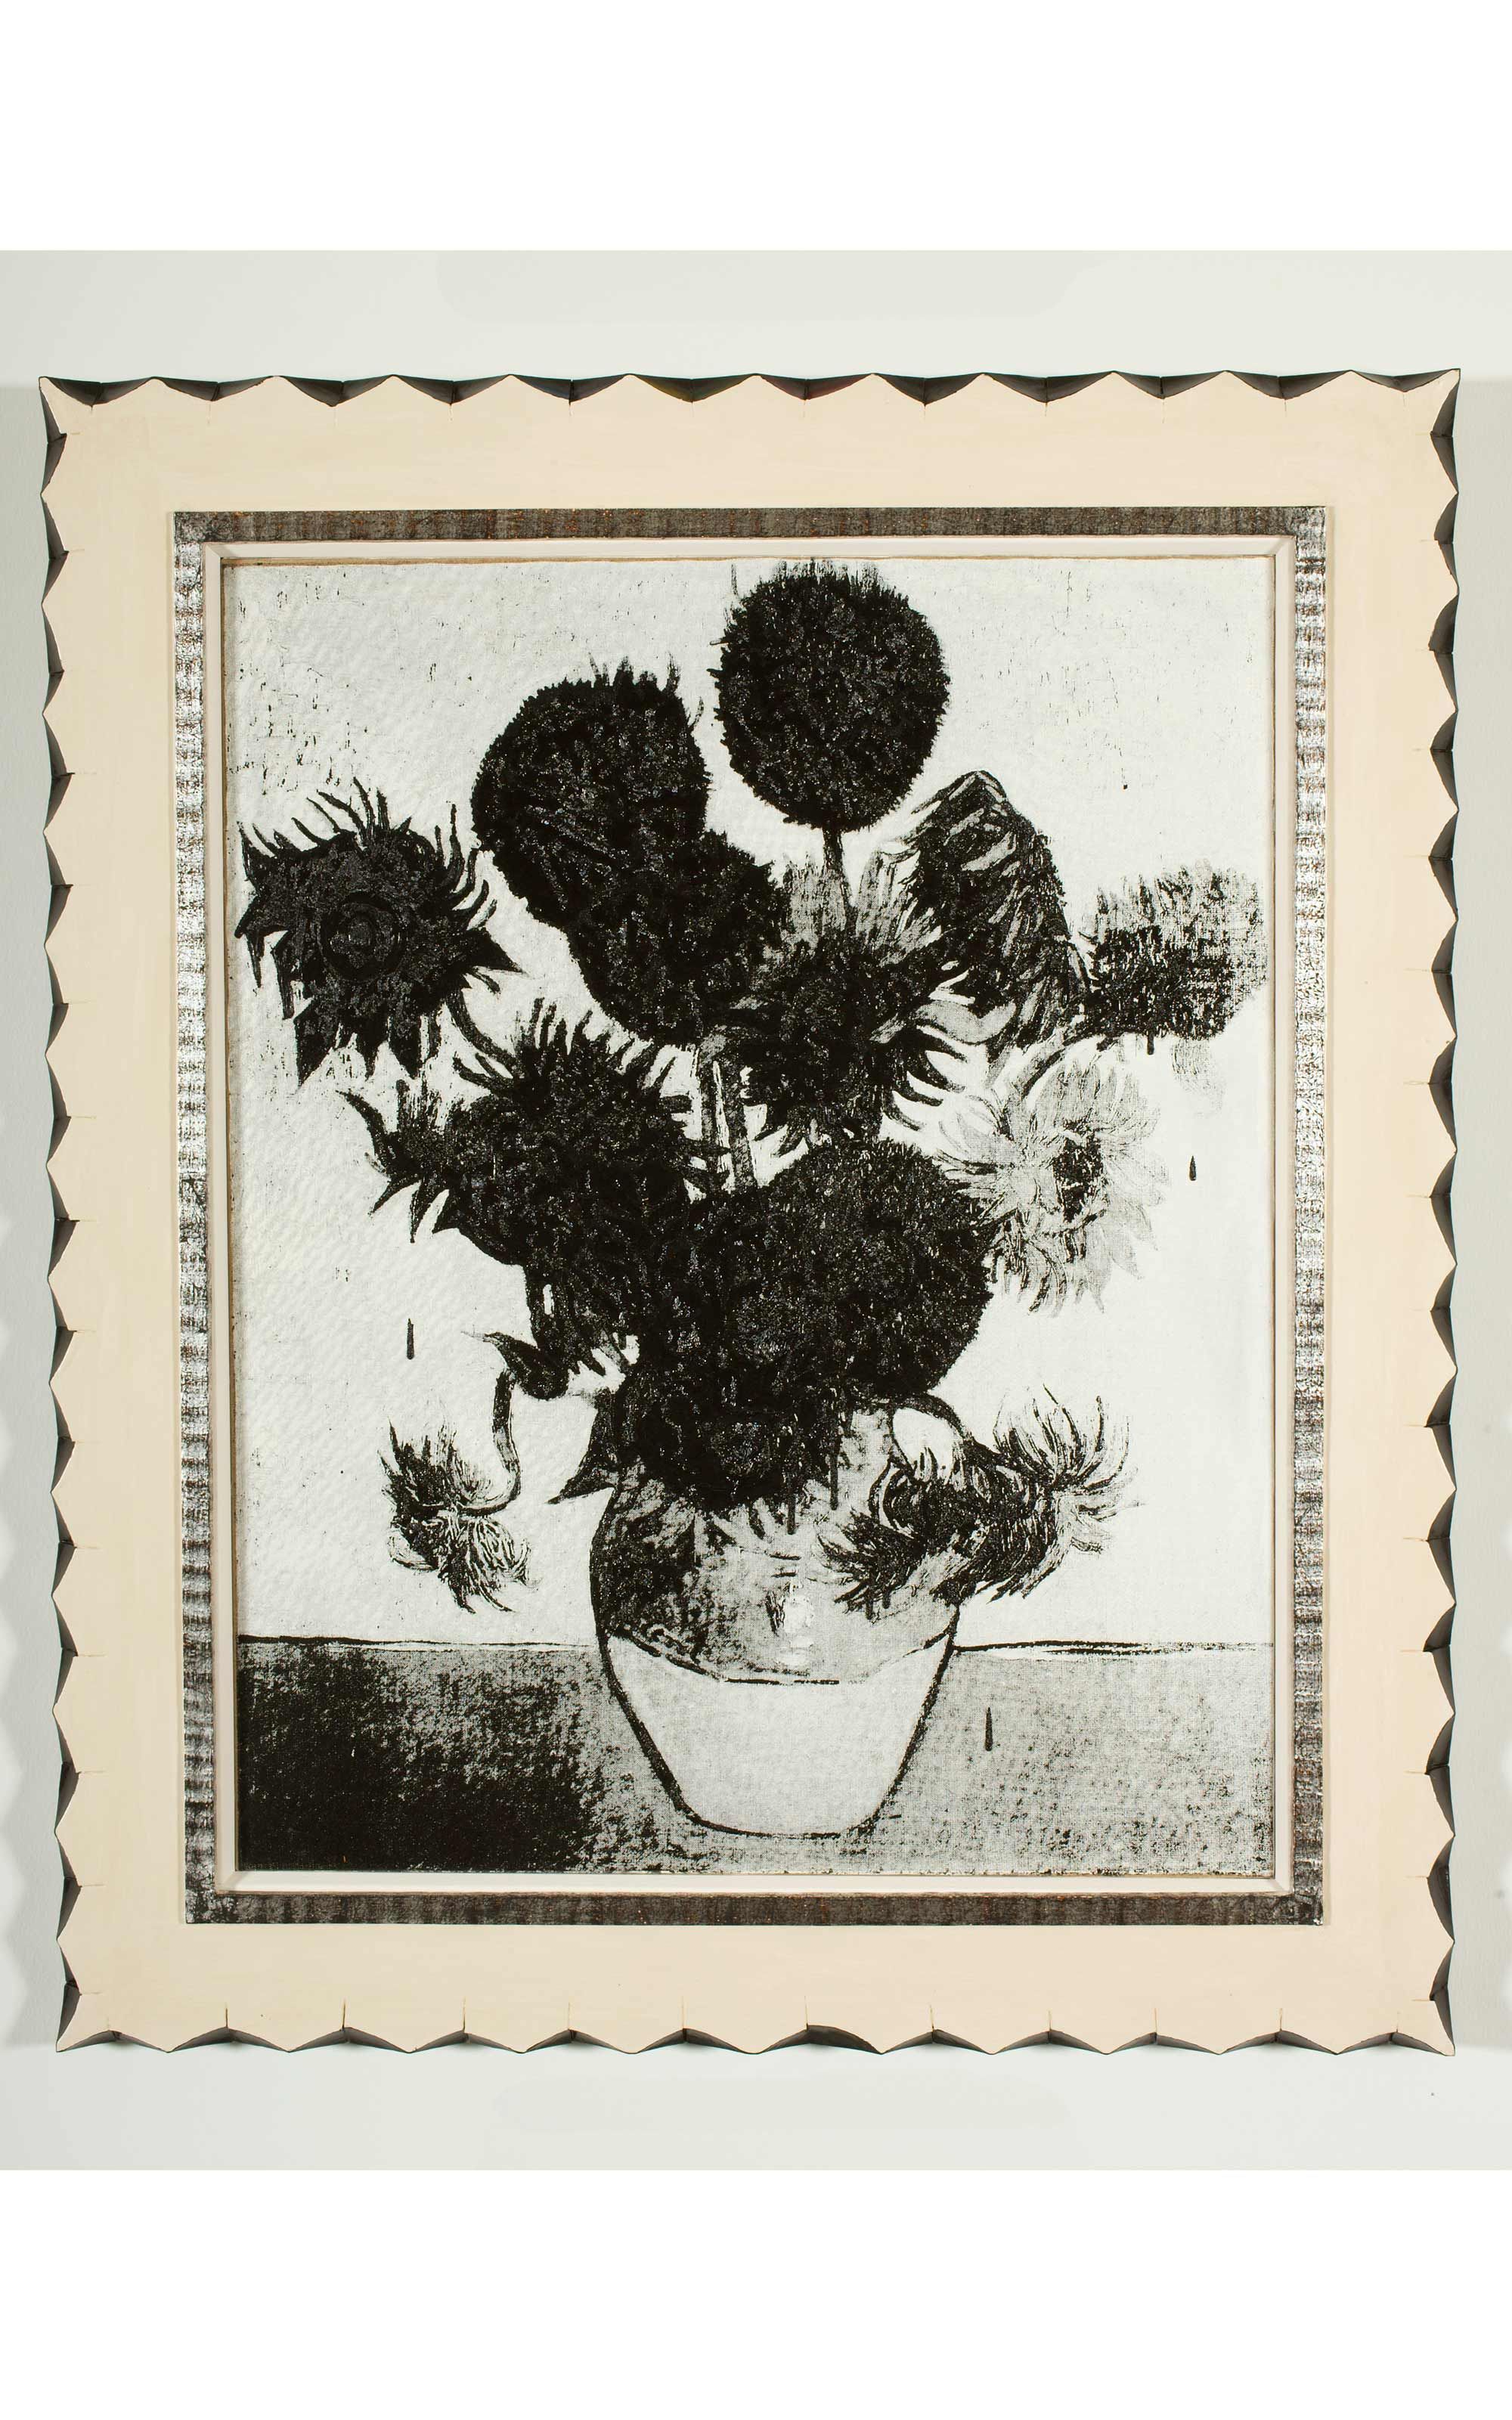 Reinvention of Van Gogh's Sunflowers turned into black weeping blooms.